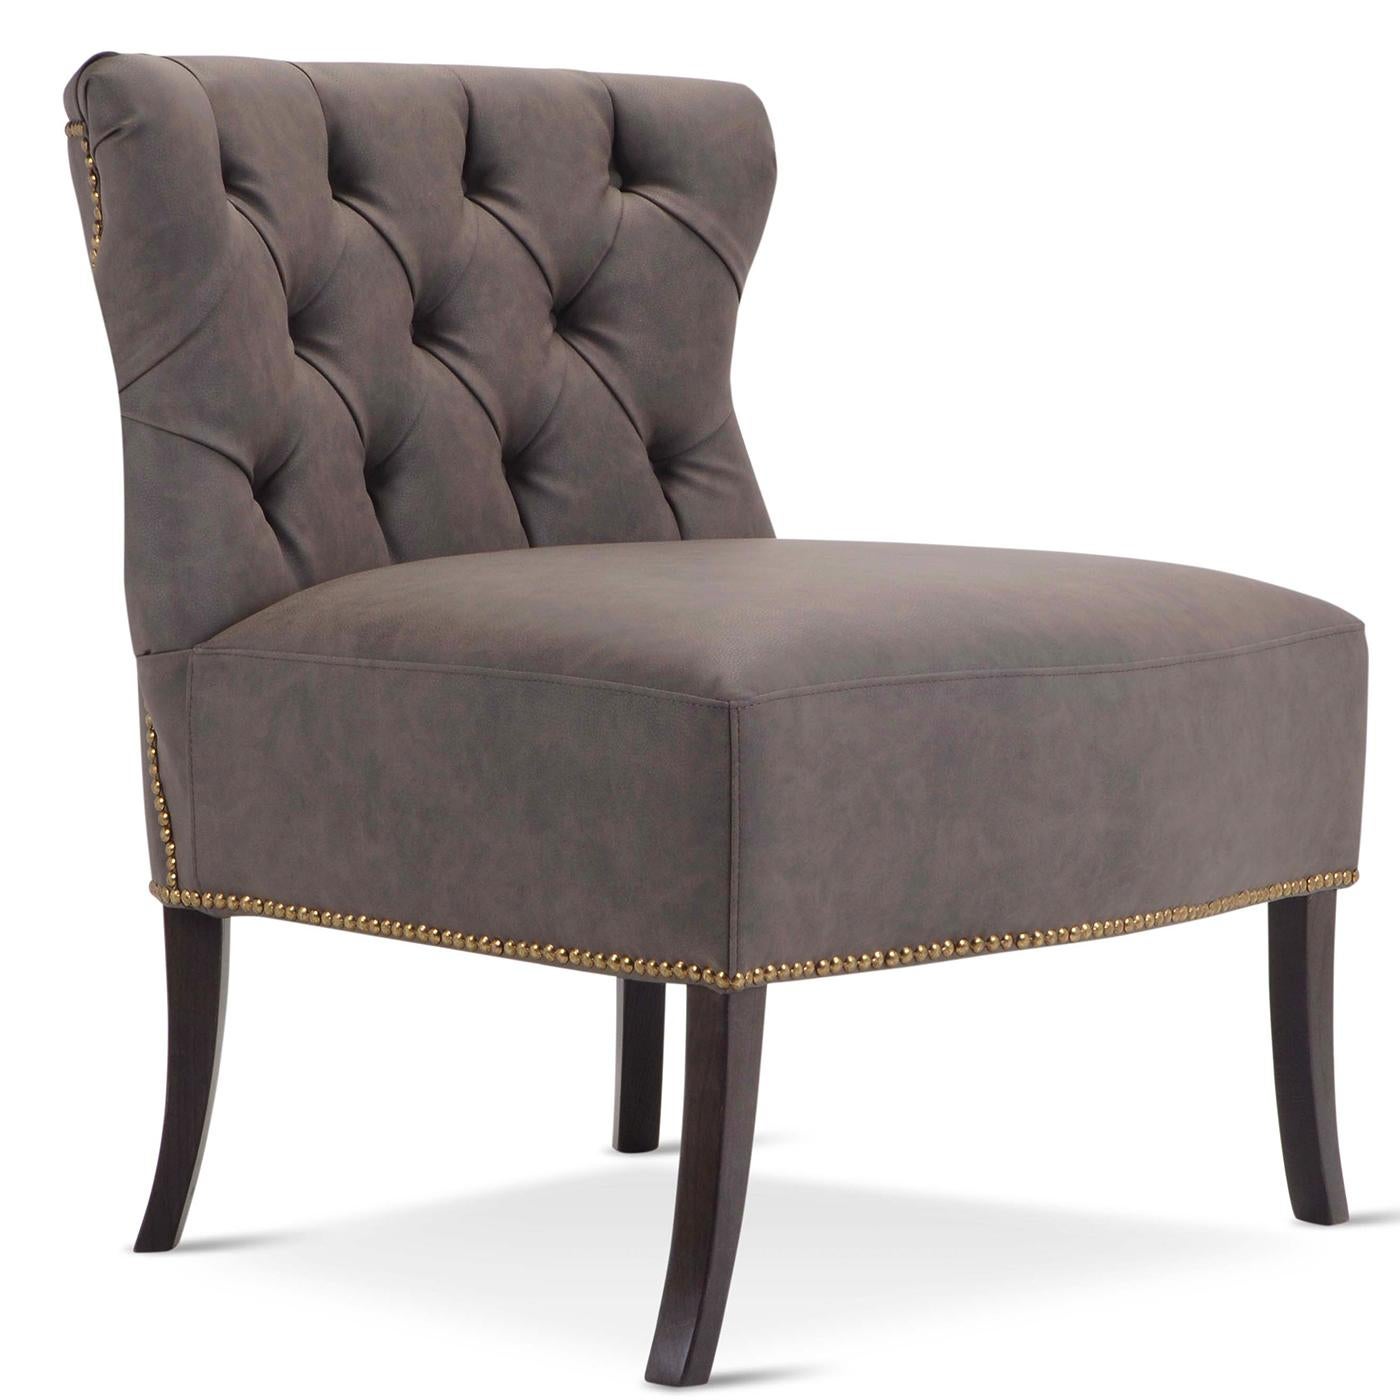 Classic and refined, this armchair boasts a generous silhouette with a broad tufted back and a square seat cushion supported by Saber-style wooden legs with a black finish. Upholstered in dark gray Dacron, the plywood frame is padded with